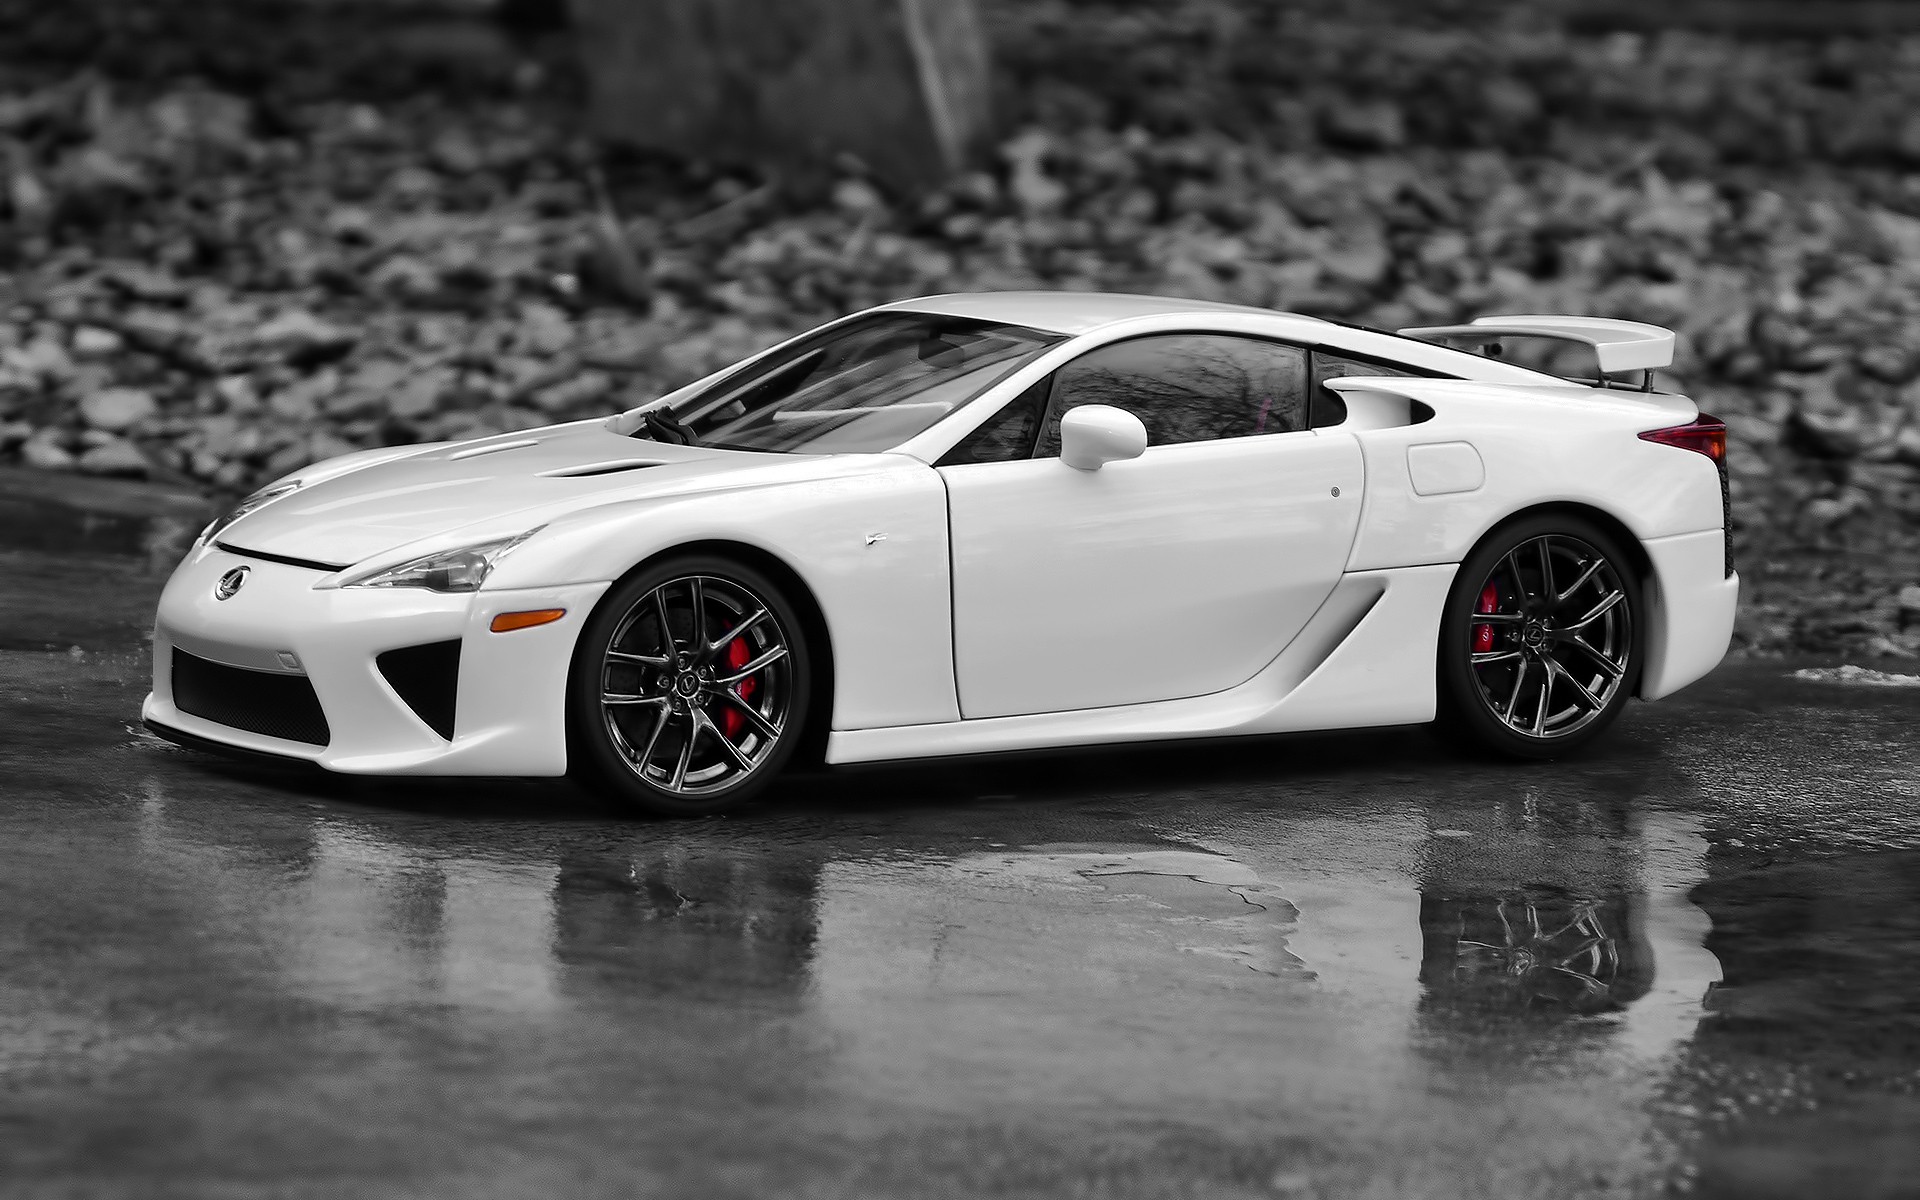 Download the following Lexus LFA Wallpaper 44930 by clicking the orange button positioned underneath the "Download Wallpaper" section.